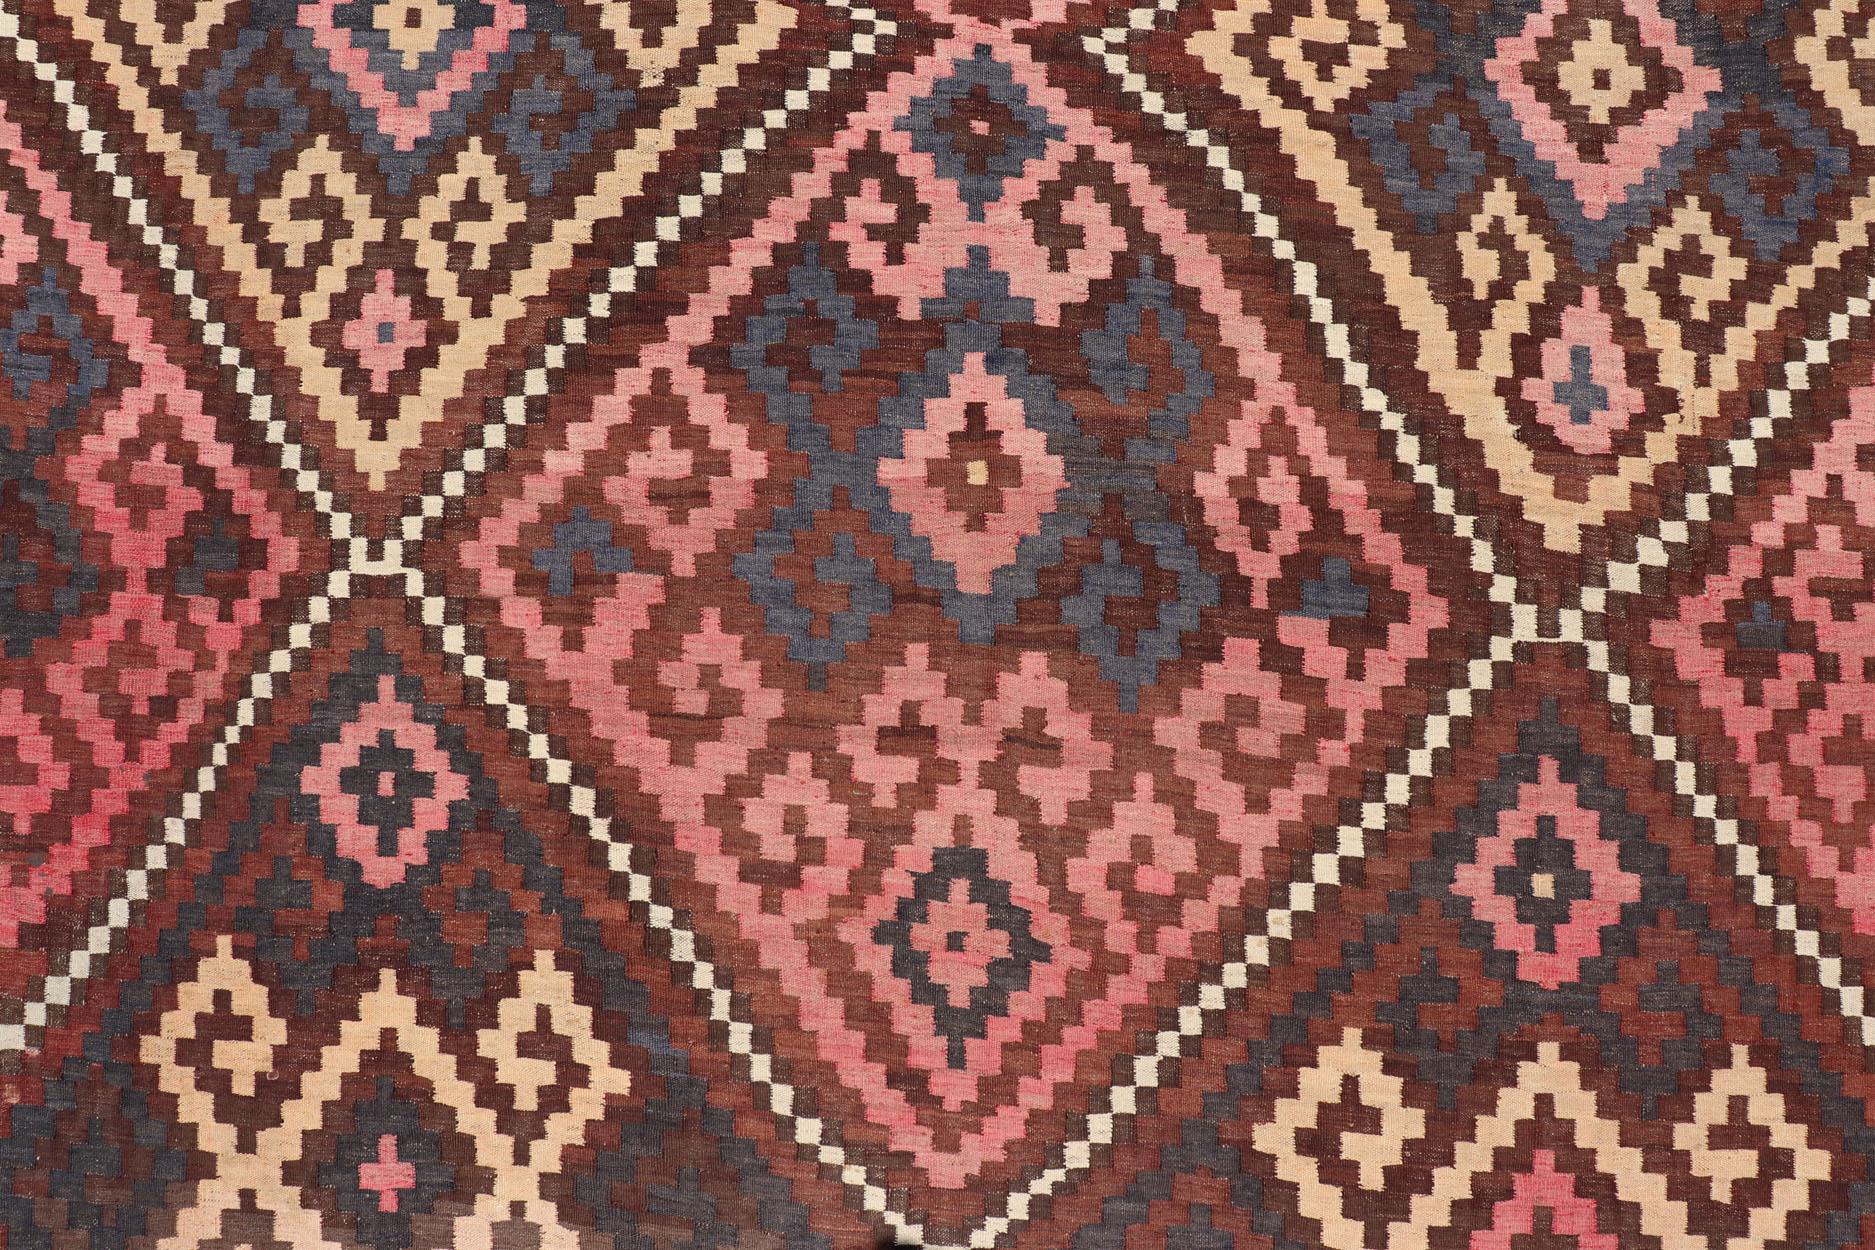 All-Over Hand Woven Geometric Kilim Diamond Design in Brown, Pink, and Ivory For Sale 1